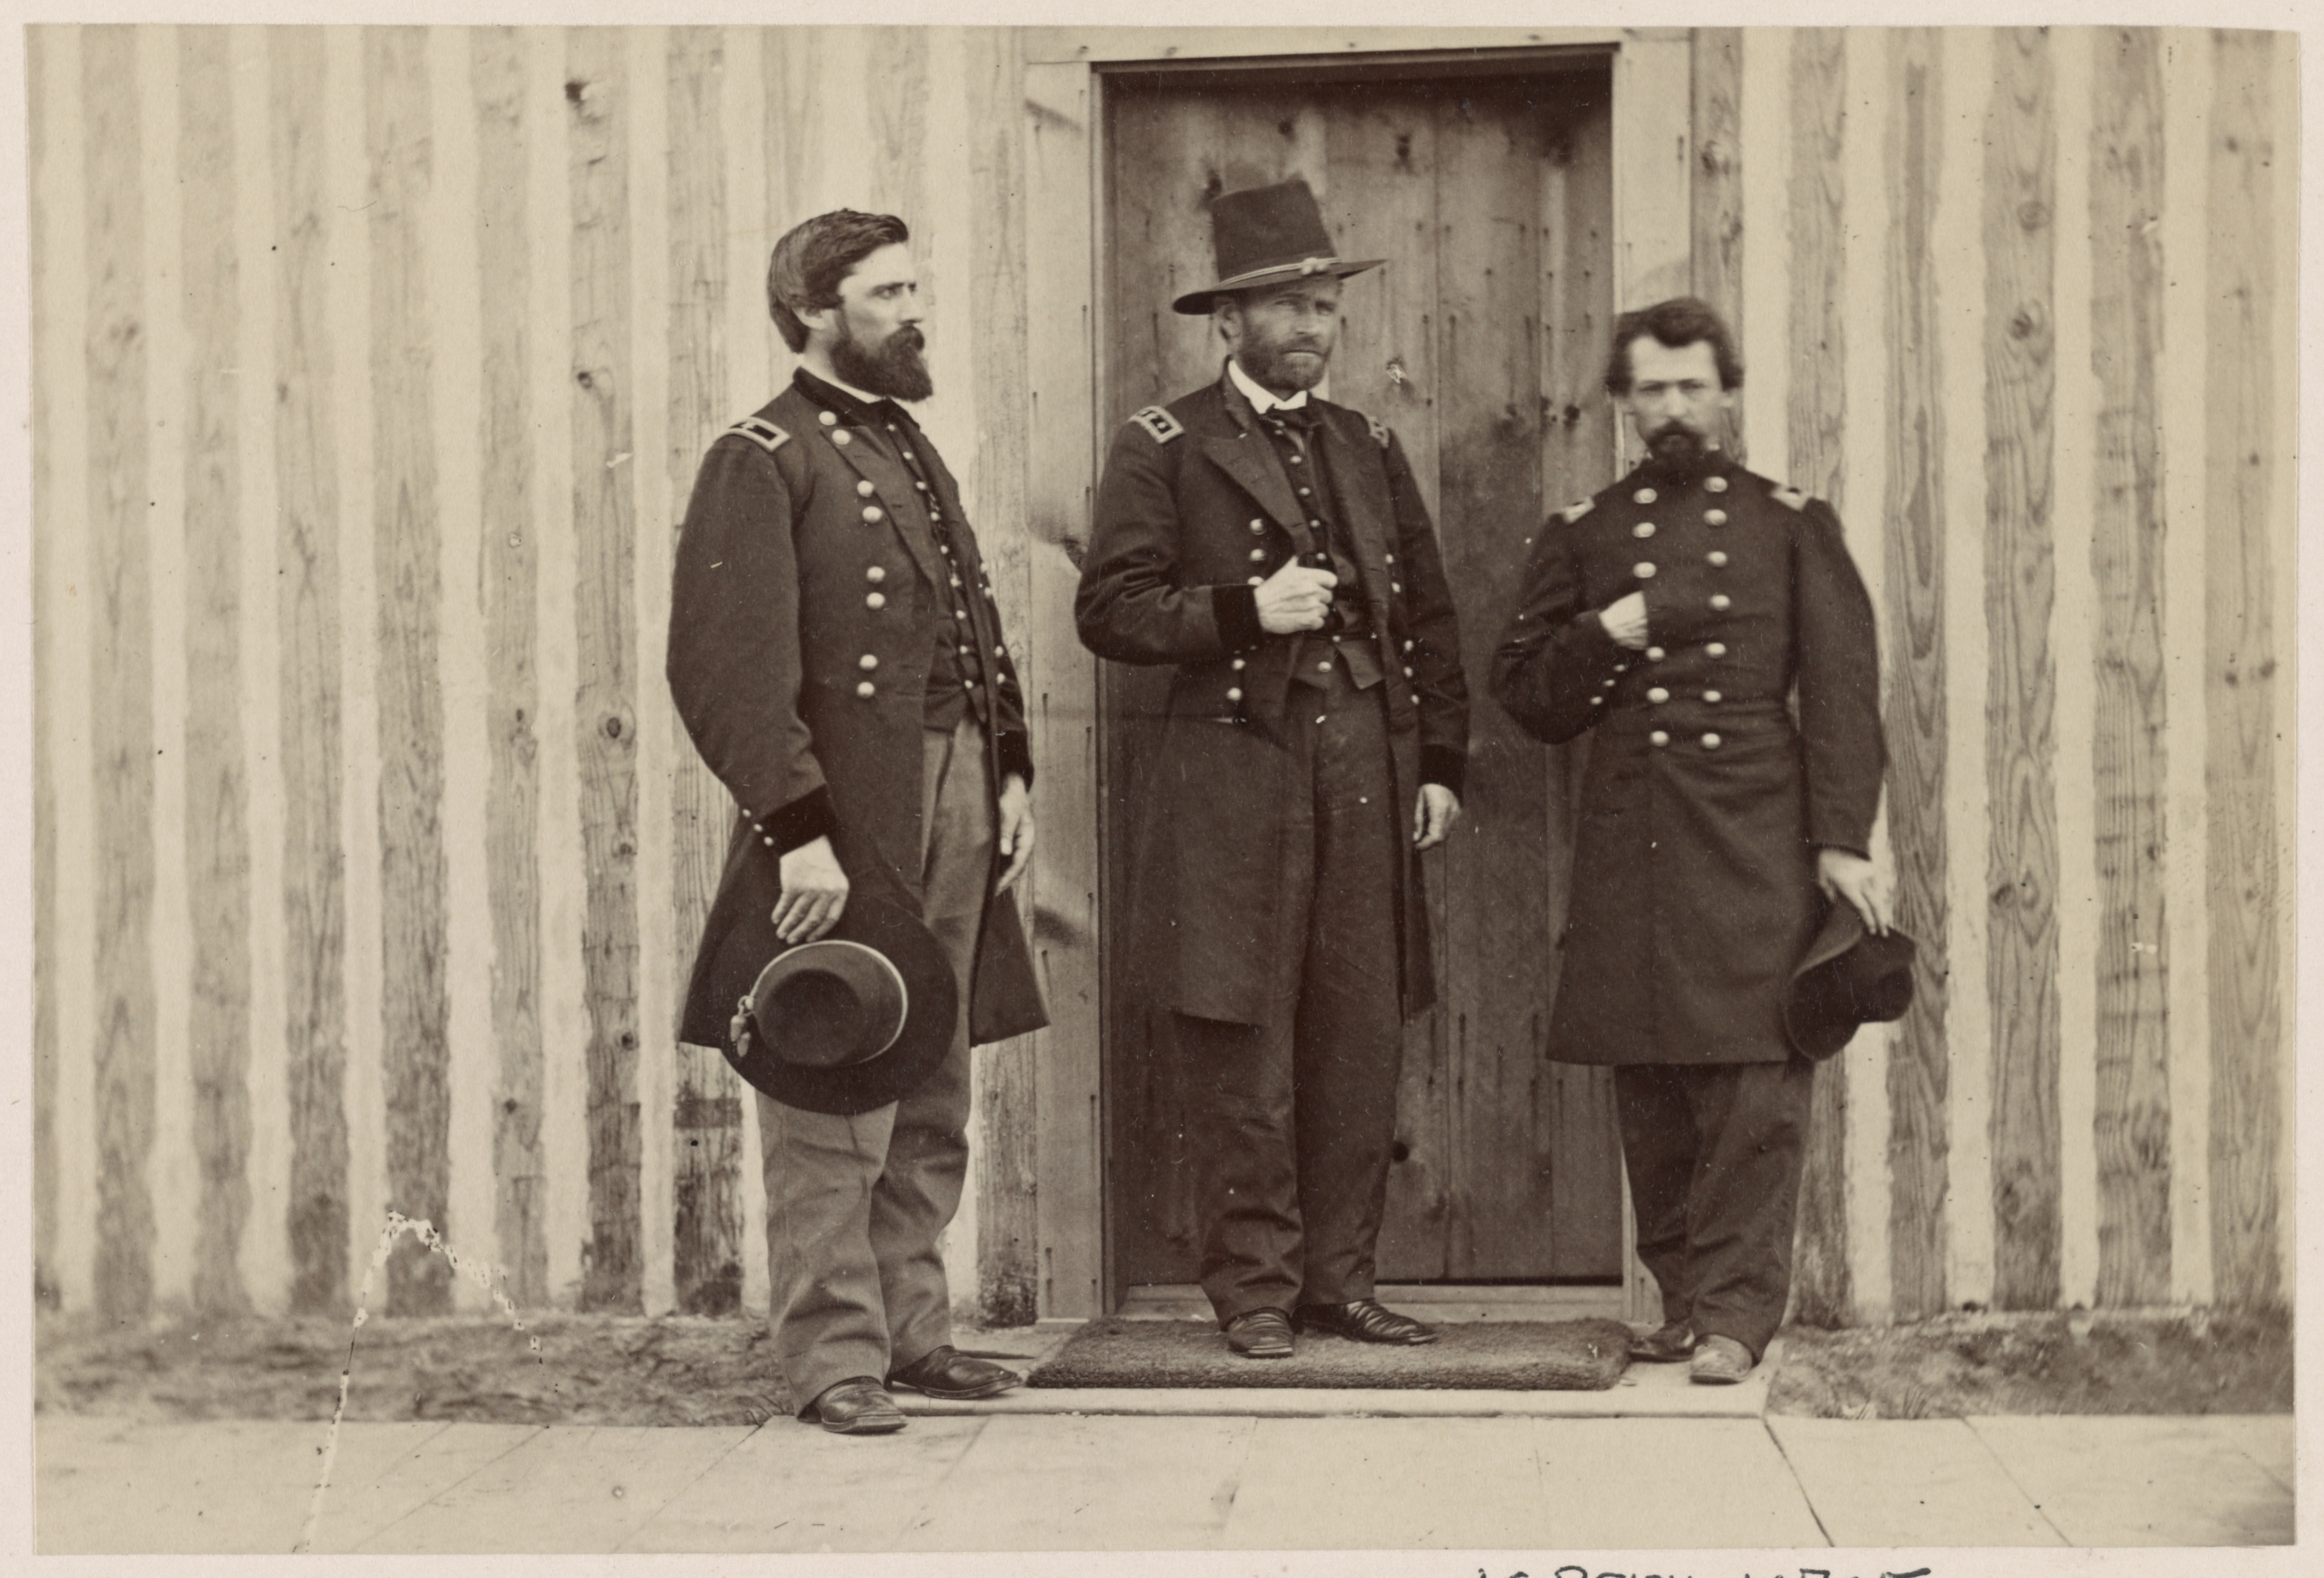 Brig. Gen. John A. Rawlins, left, Lt. Gen. Ulysses S. Grant, center, and Lt. Col. Theodore S. Bowers at City Point, Virginia. (Library of Congress)